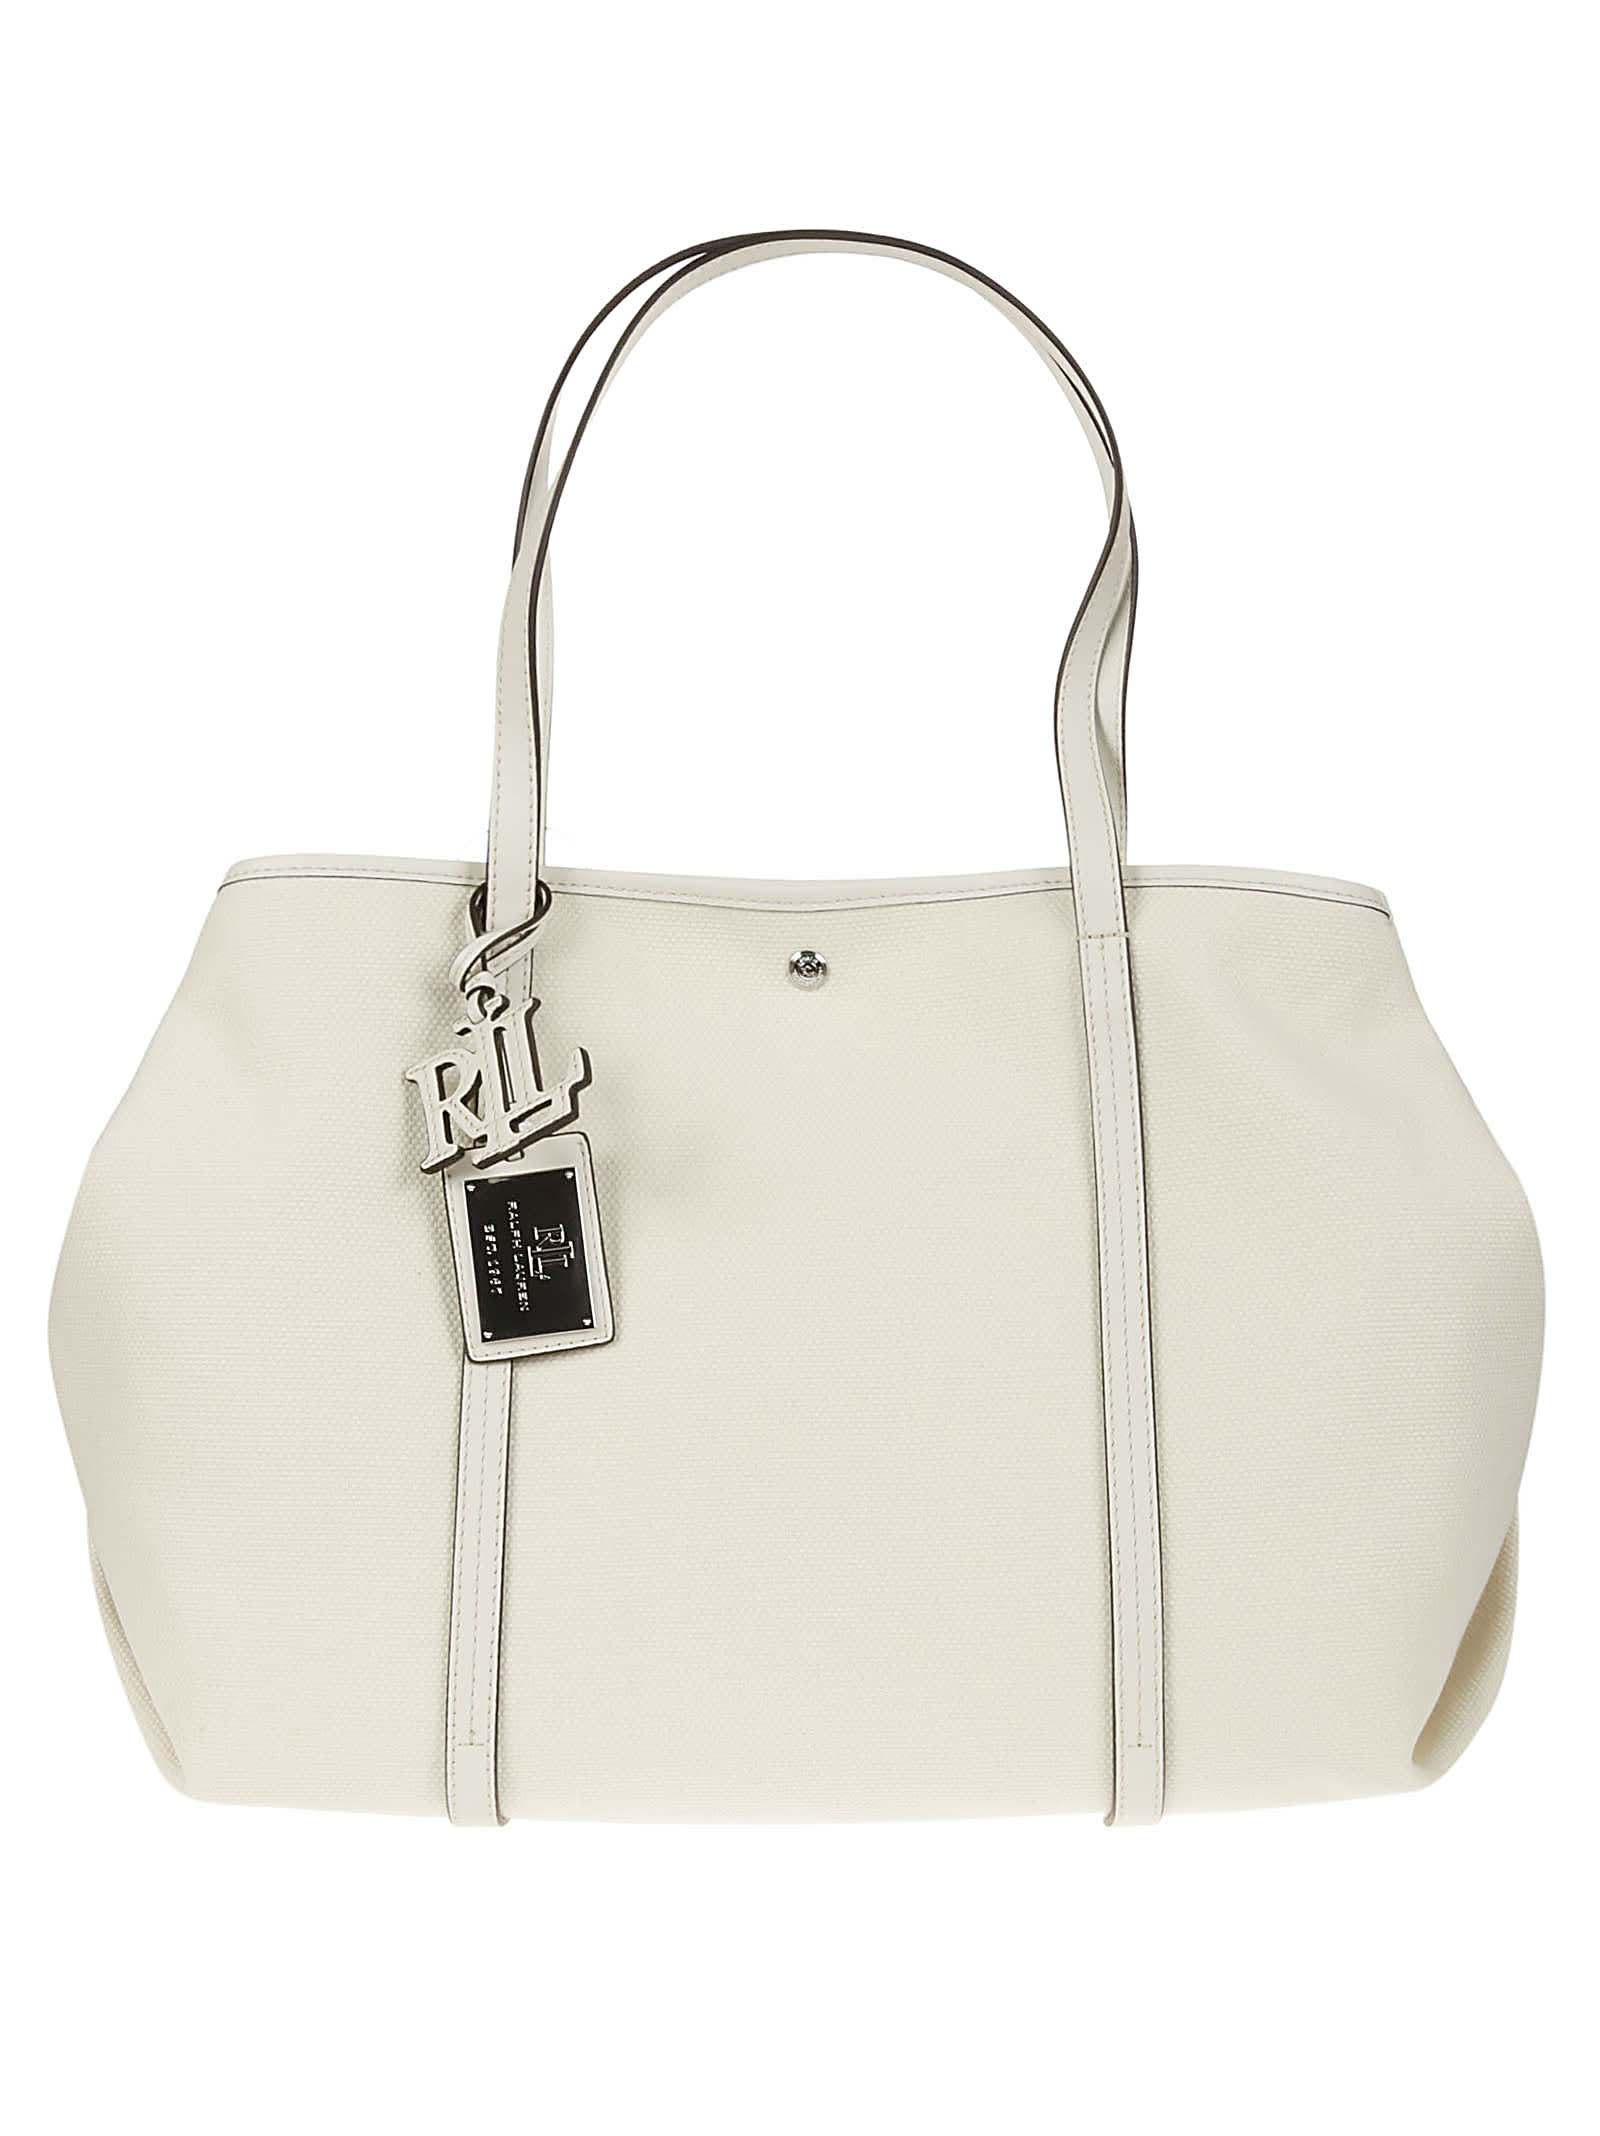 Shop Ralph Lauren Emerie Tote Tote Extra Large In Natural Soft White/soft White